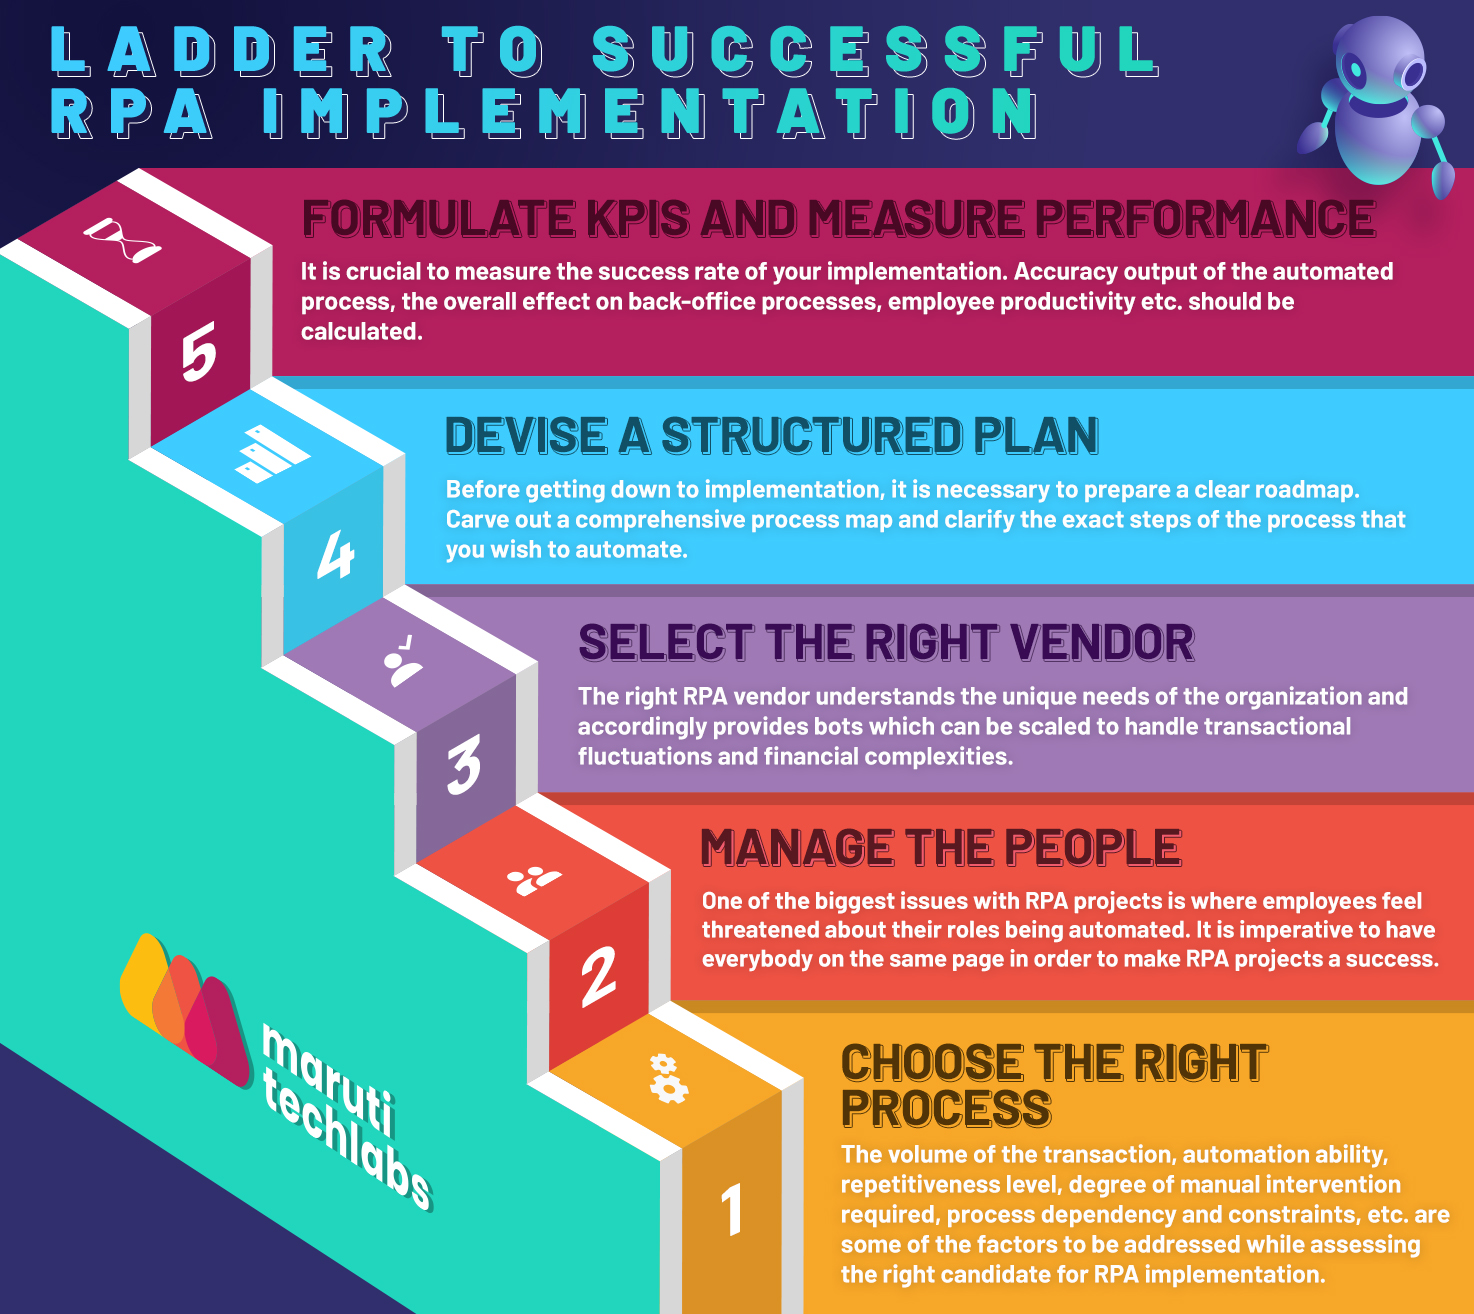 Ladder to successful RPA Implementation